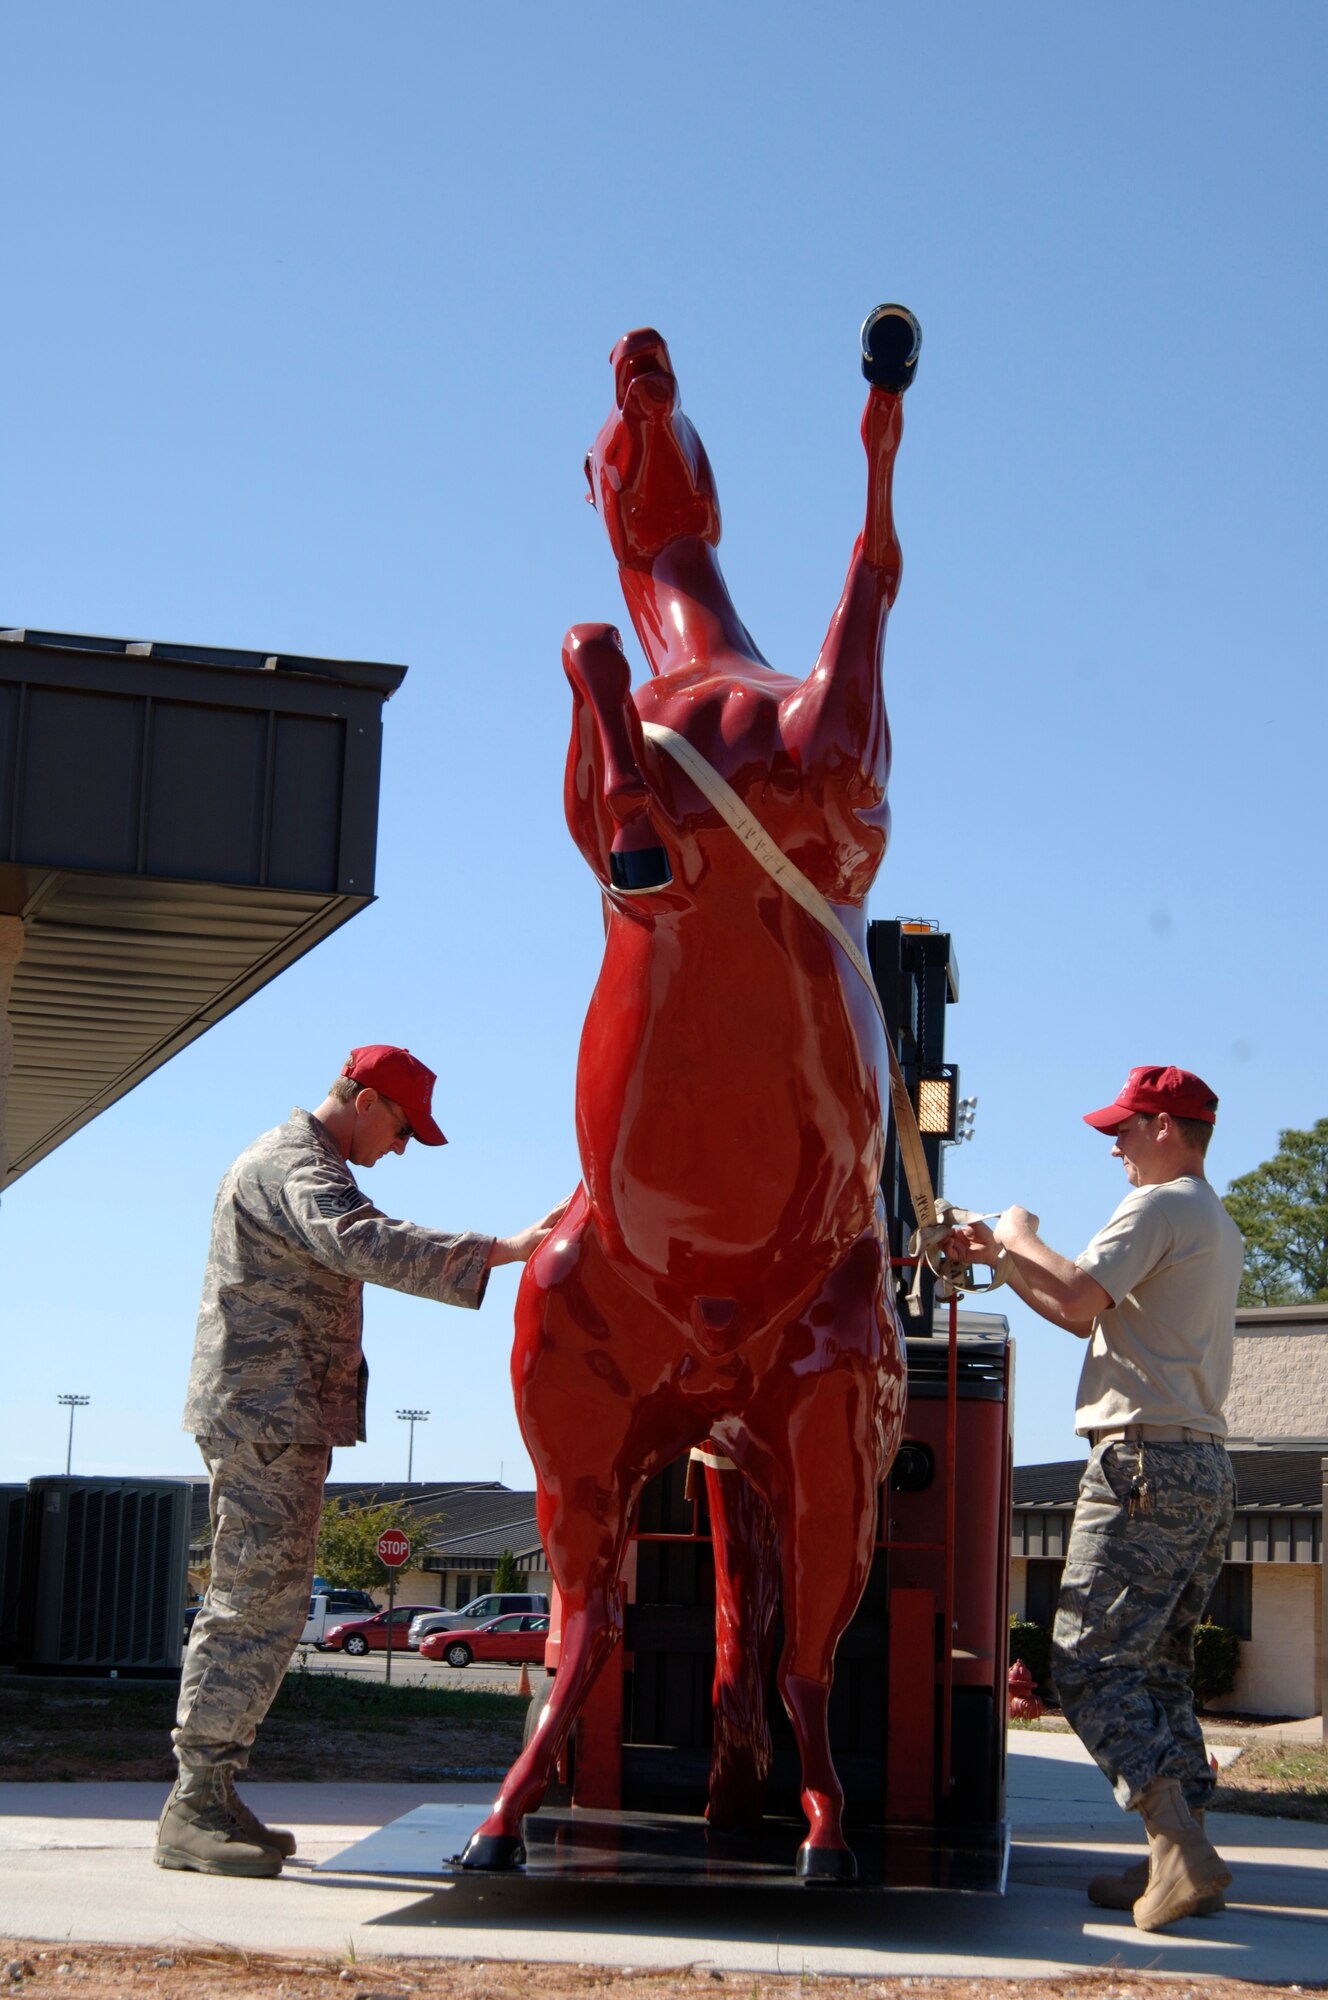 HURLBURT FIELD, Fla. -- Staff Sgt. Chris Becvar and Tech. Sgt. Toby Stapleton, both assigned to the 556th RED HORSE Squadron, install the RESD HORSE mascot here, Nov. 1. The 556 RHS, a combat support reserve unit, mirrors the active-duty 823rd RED HORSE Squadron, also located at Hurlburt Field. The two units are bedded down together as part of the Air Force's total force integration initiative. (U.S. photo by Senior Airman Sheila deVera)